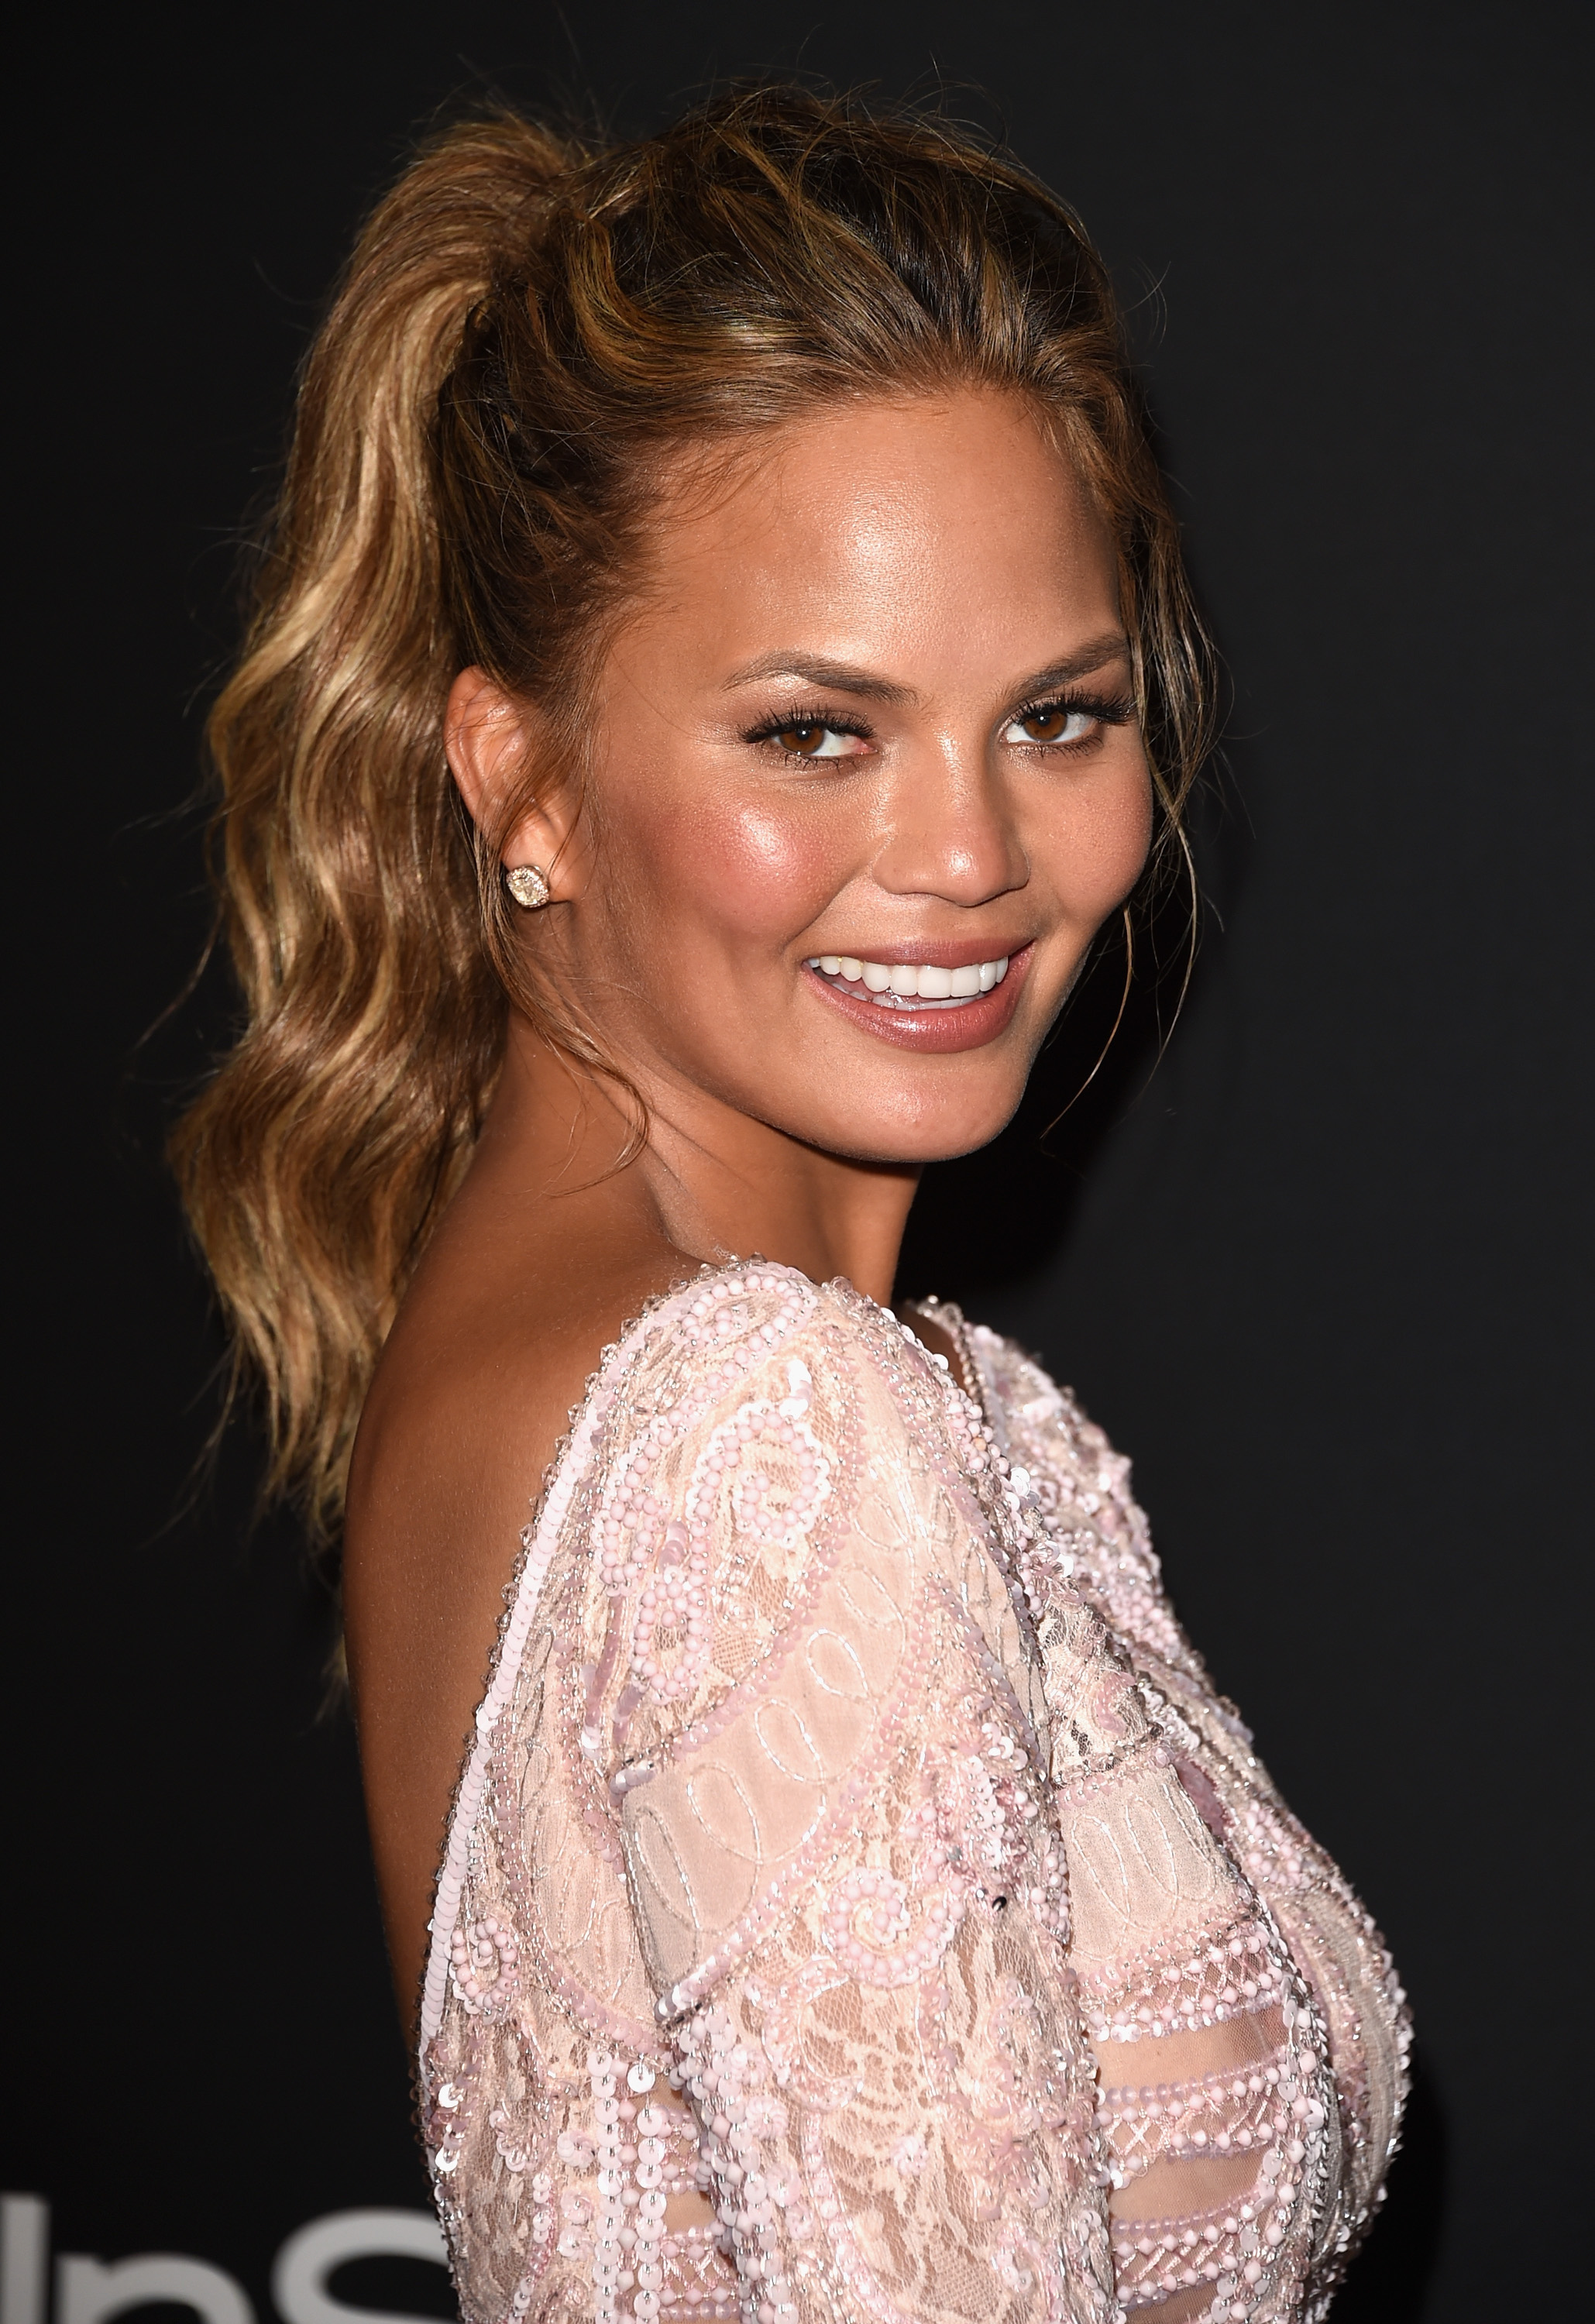 Model Chrissy Teigen attends the 72nd Annual Golden Globe Awards Post-Party on Jan. 11, 2015 in Beverly Hills, Calif.